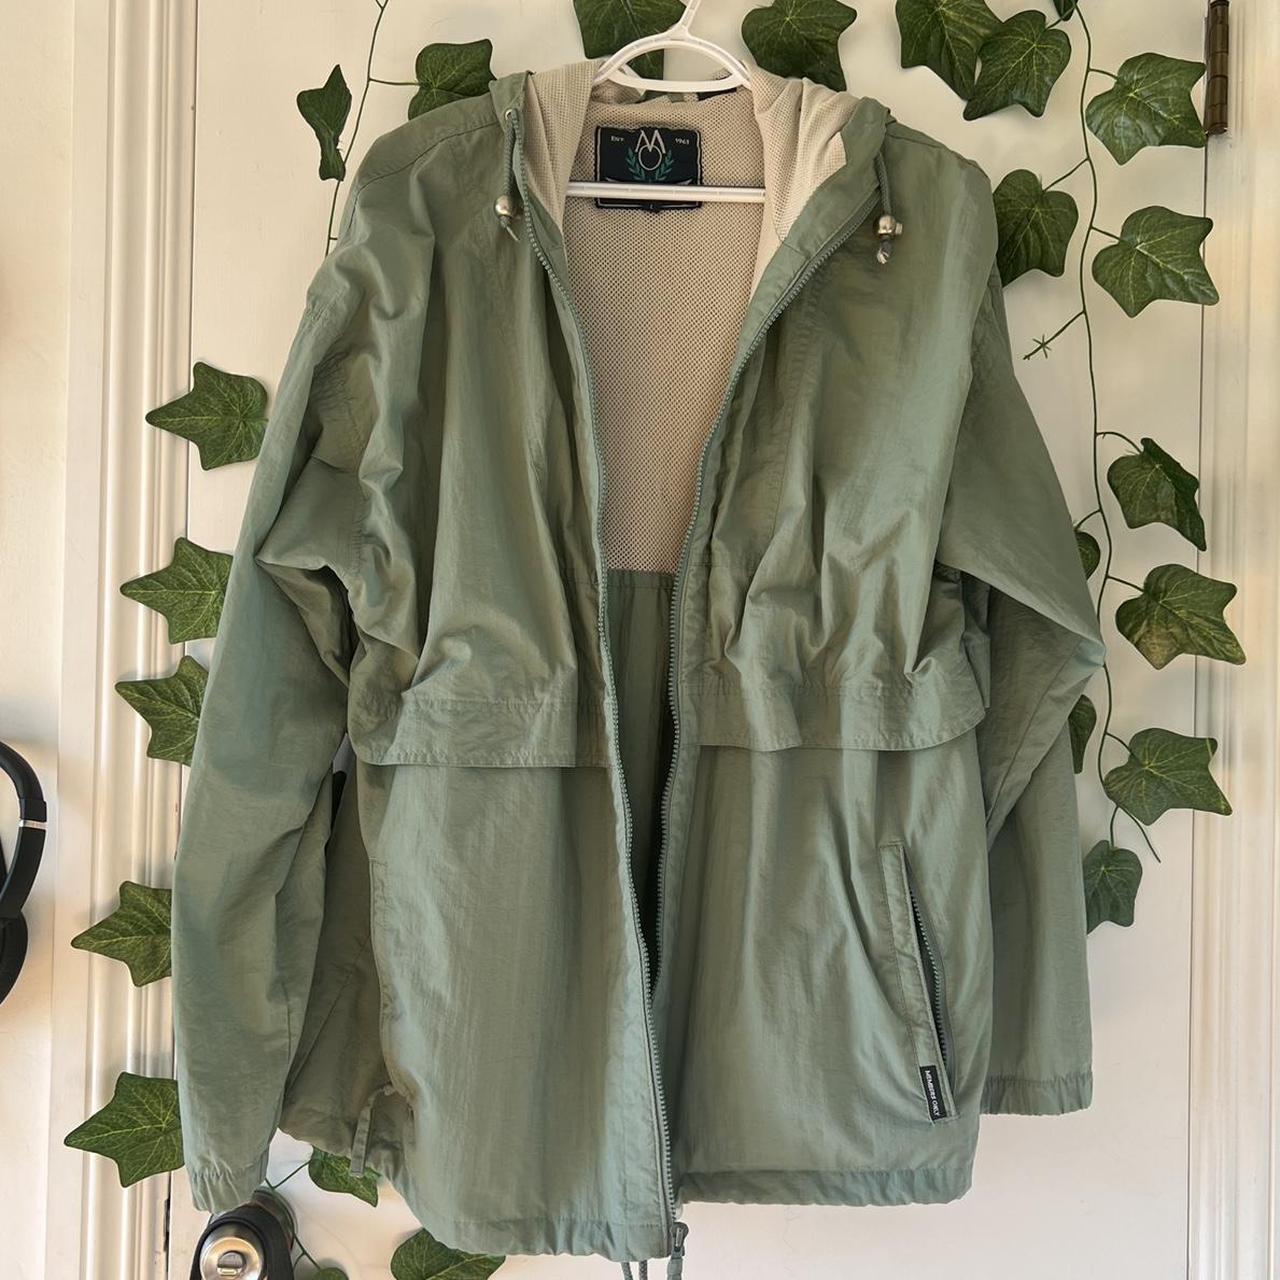 Members Only Women's Green and Cream Jacket